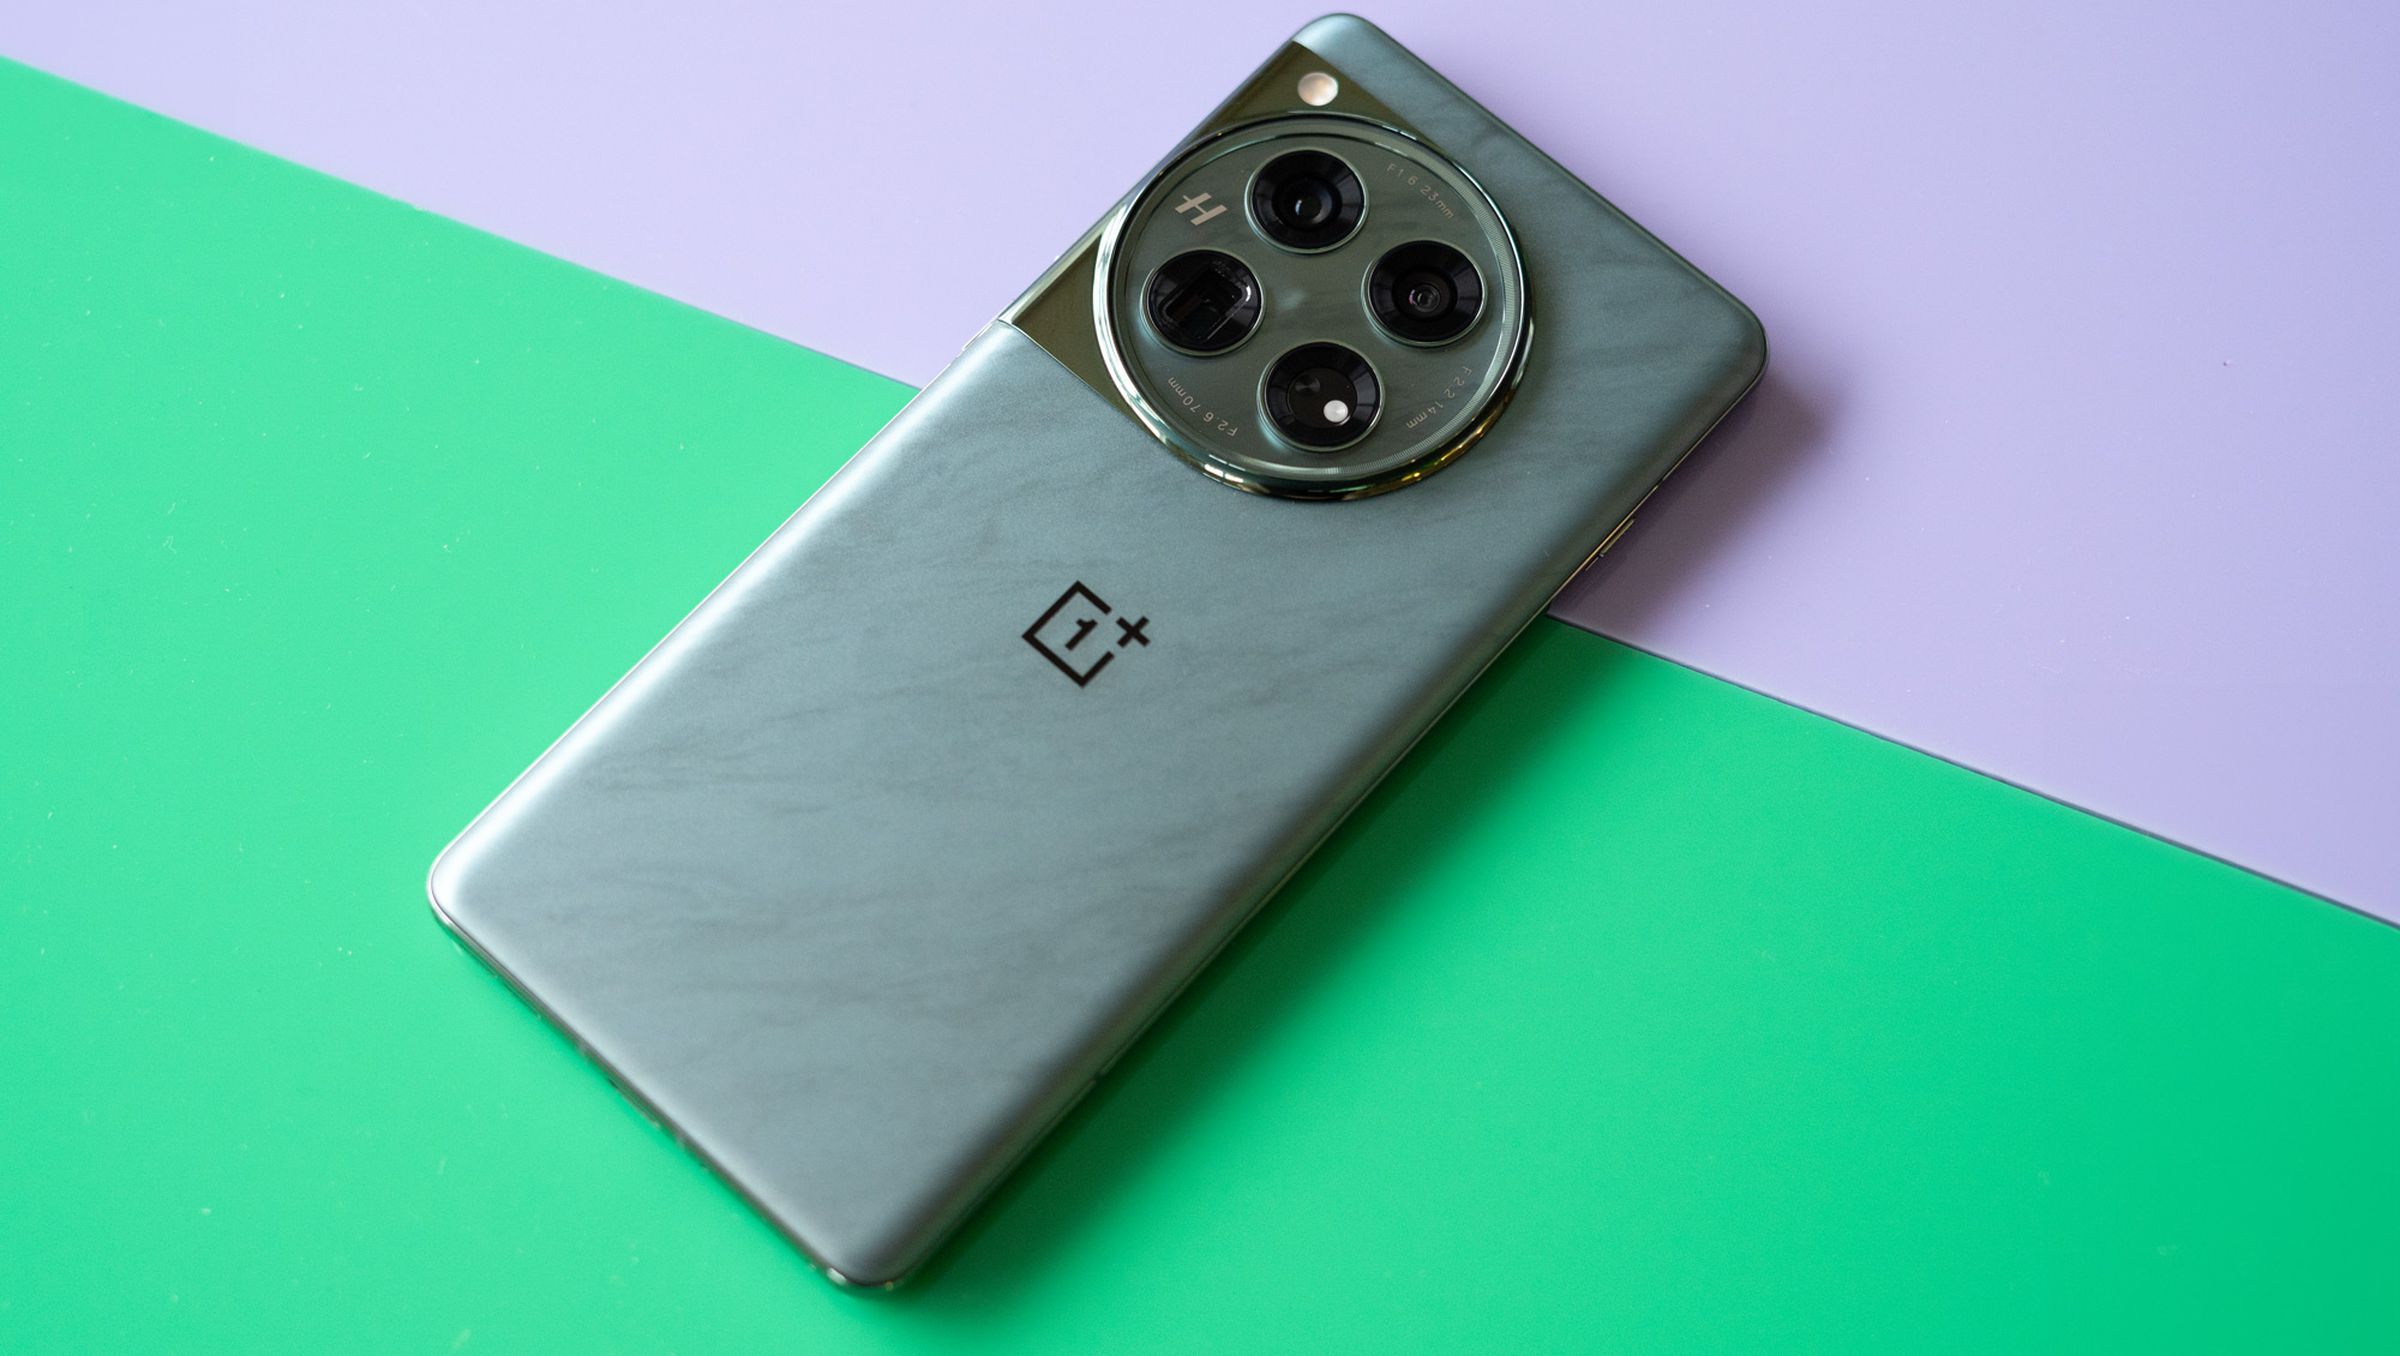 The Ultimate OnePlus 12 Review: Is It Worth the Hype? - Final thoughts on the OnePlus 12